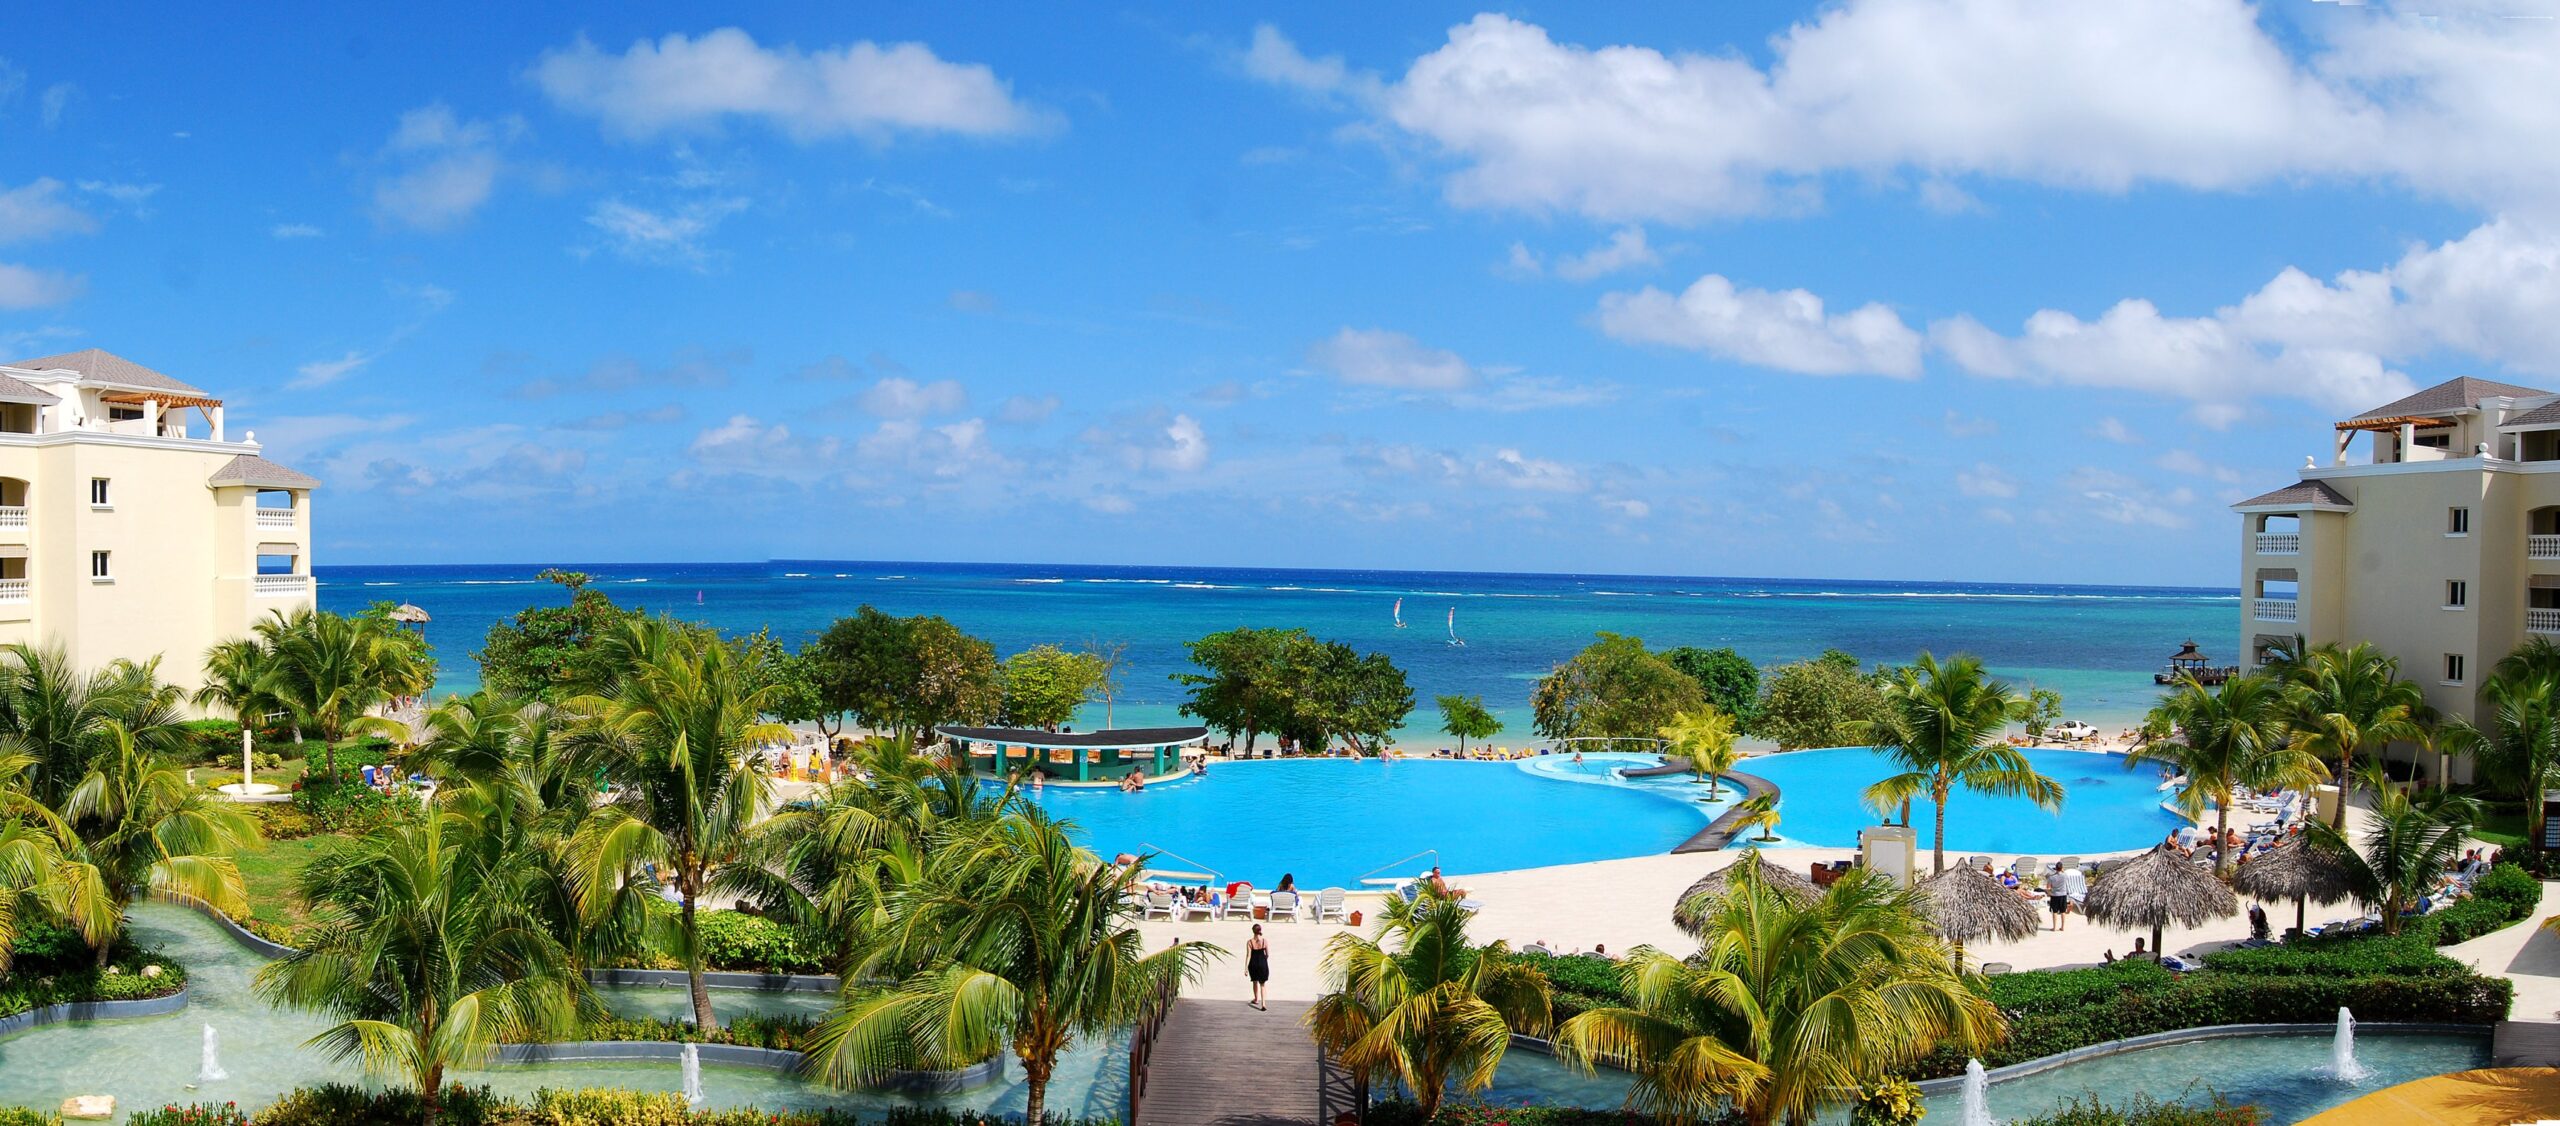 View of the Caribbean Sea from the Iberostar Hotel and Resort